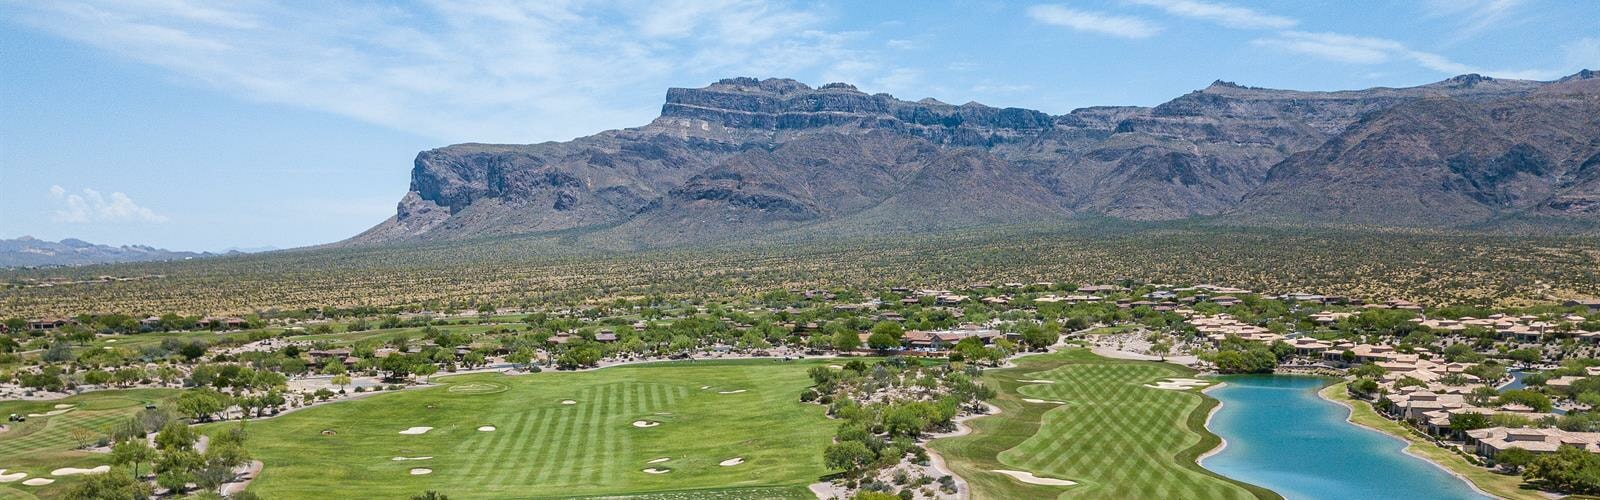 superstition-mountain-aerial-view